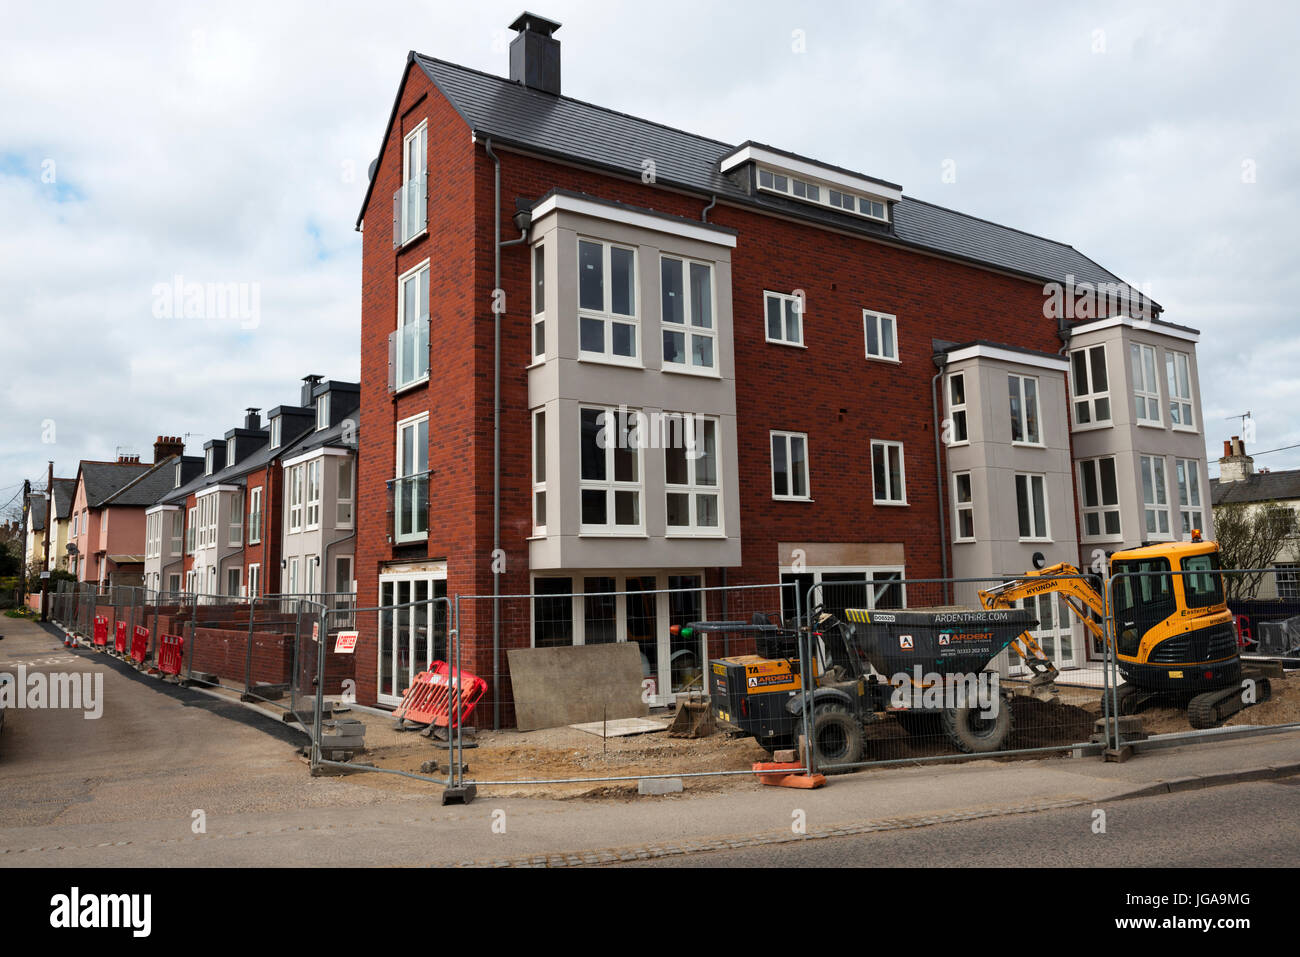 Newly constructed homes and business outlets, Woodbridge, Suffolk, UK. Stock Photo